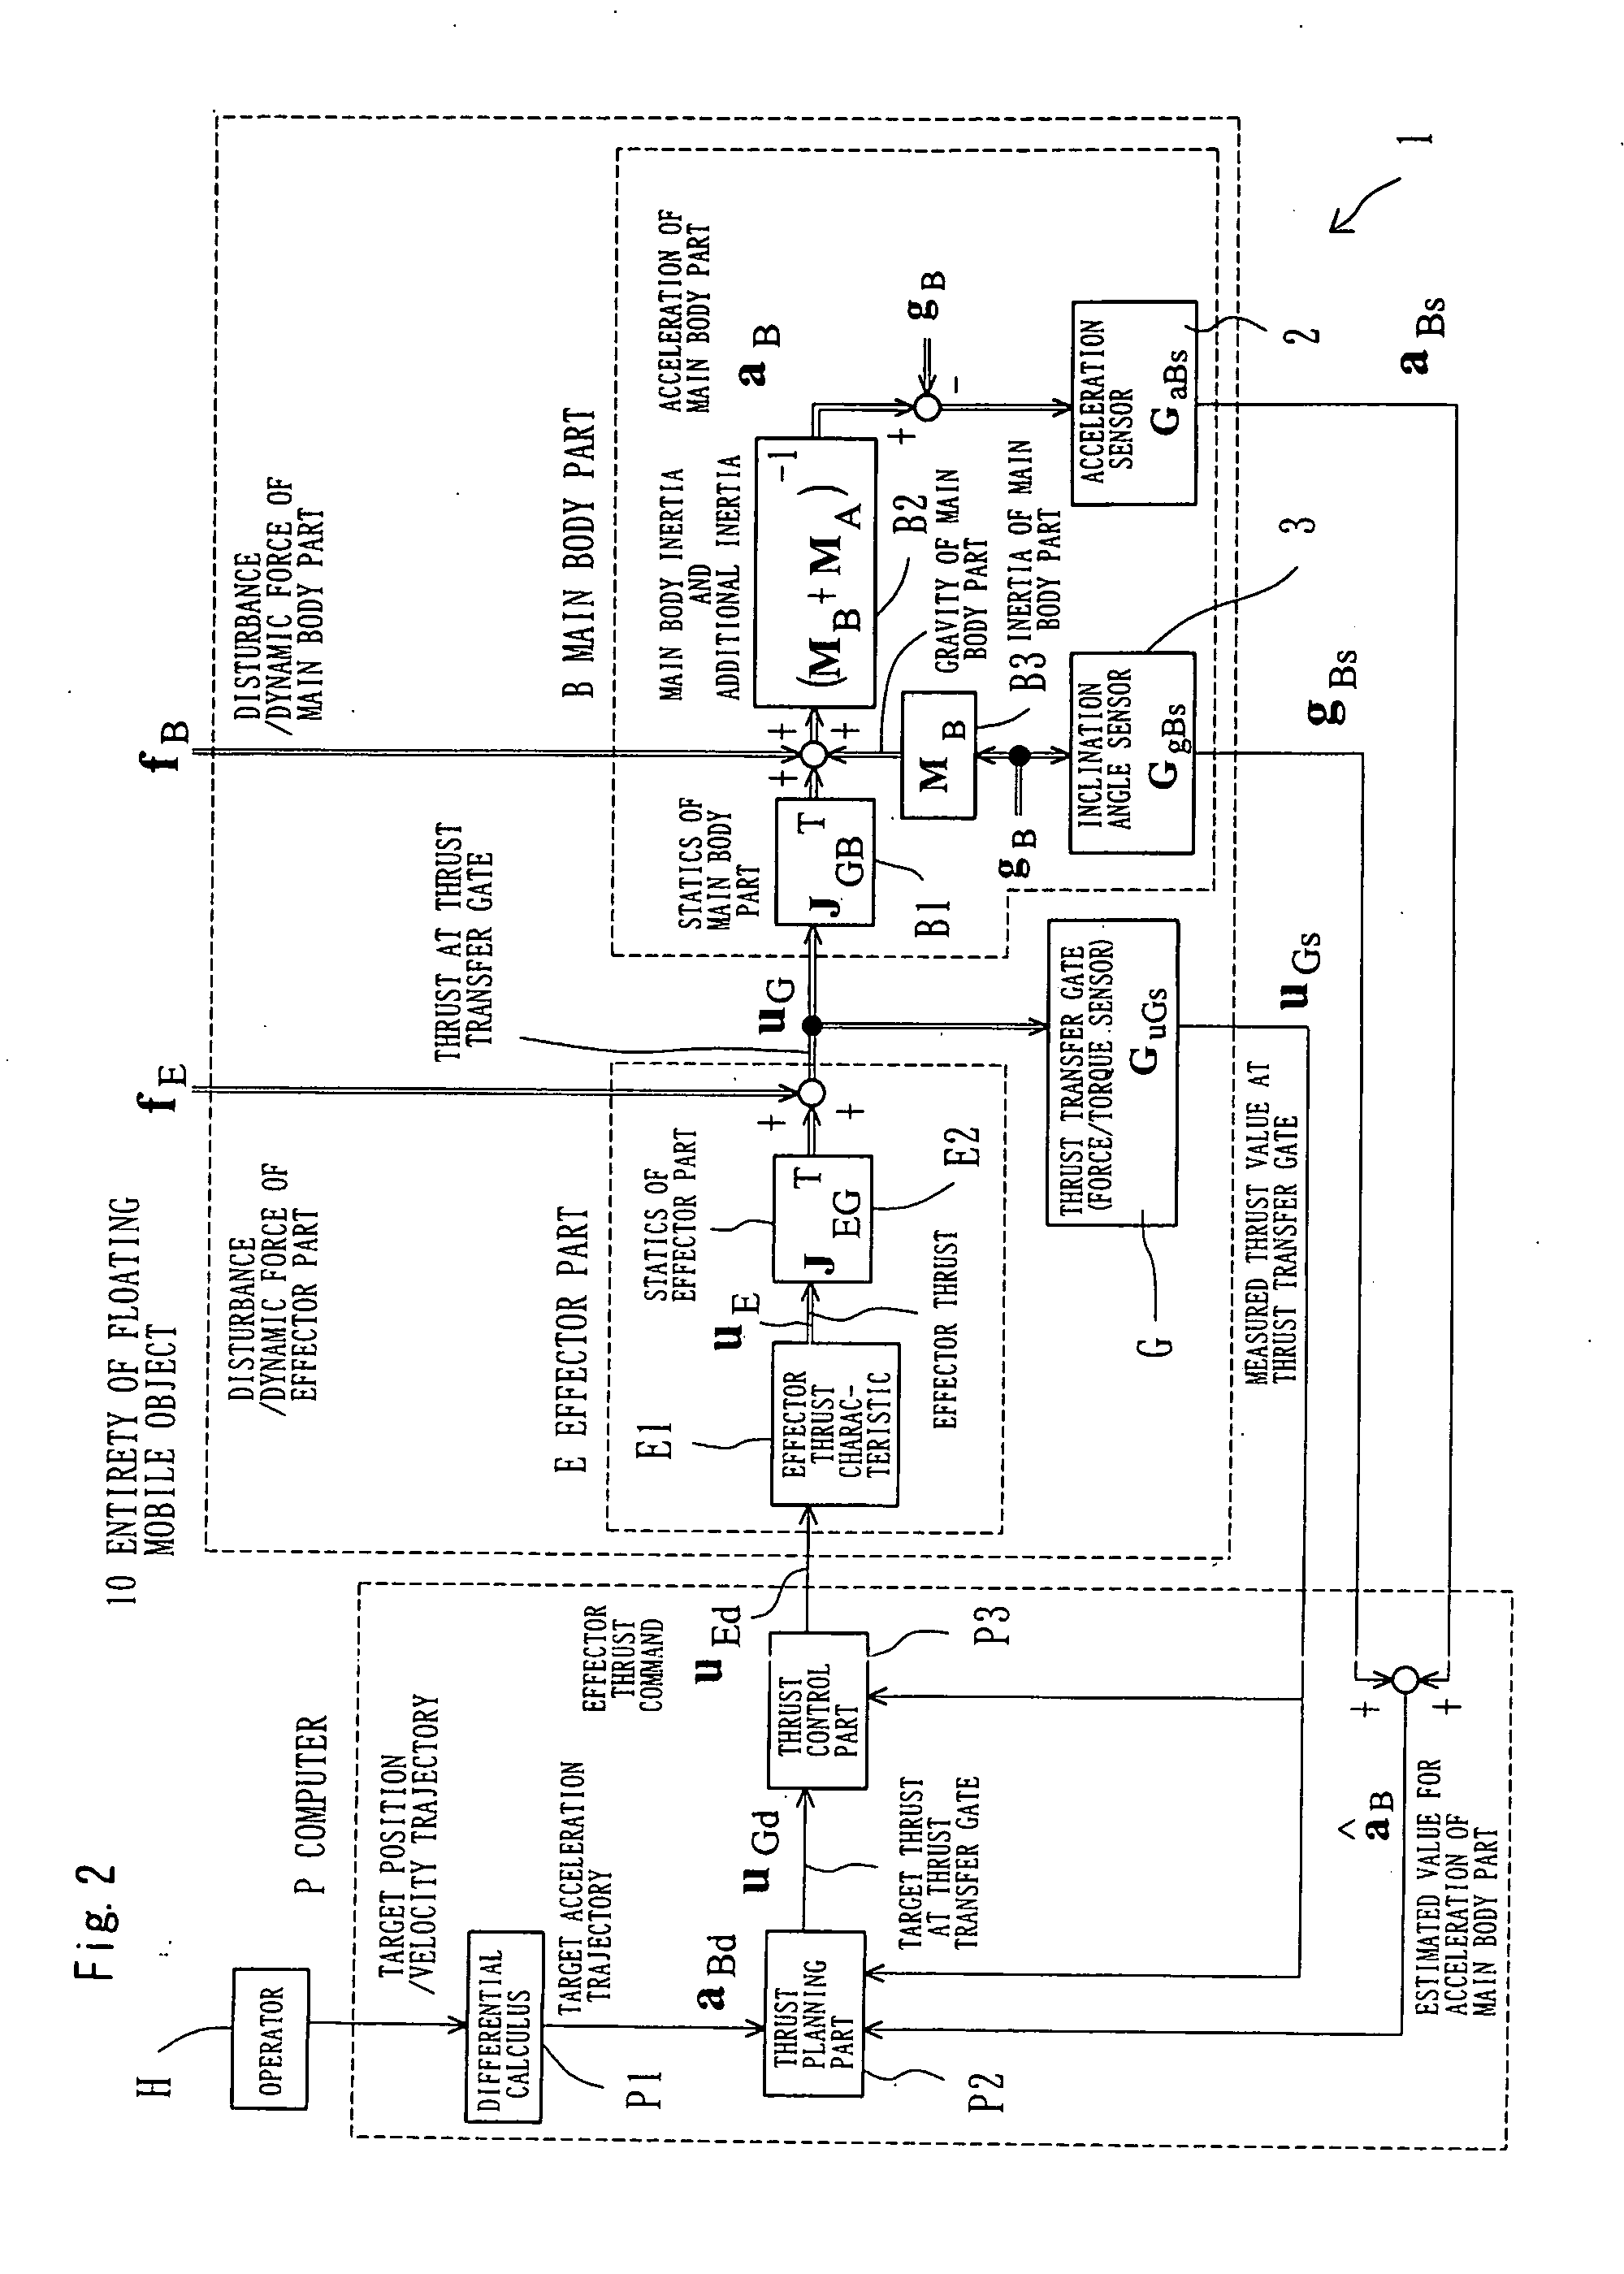 Control system of floating mobile body